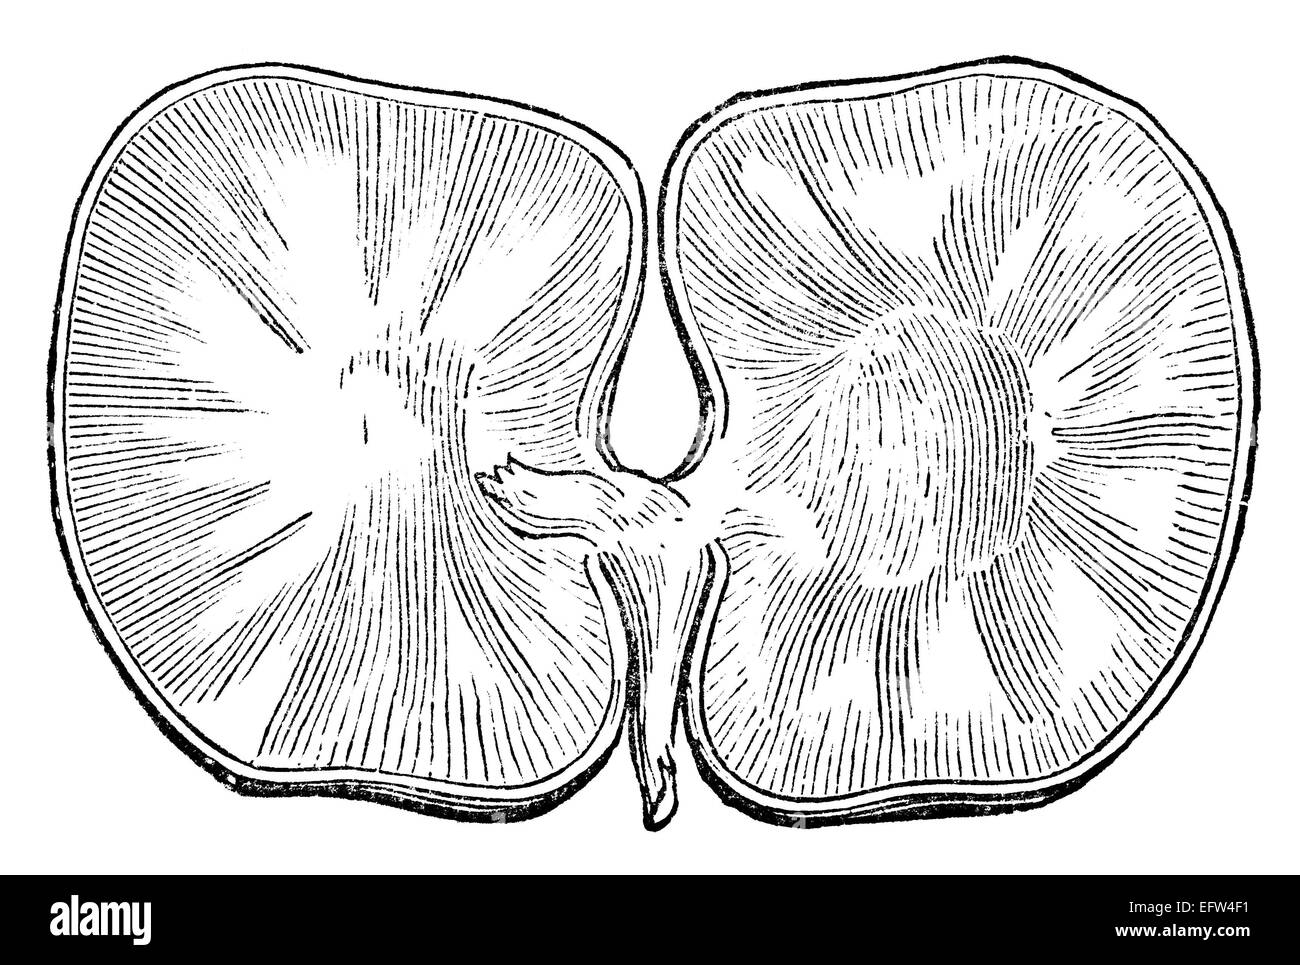 Victorian engraving of a disected plant seed. Digitally restored image from a mid-19th century Encyclopaedia. Stock Photo